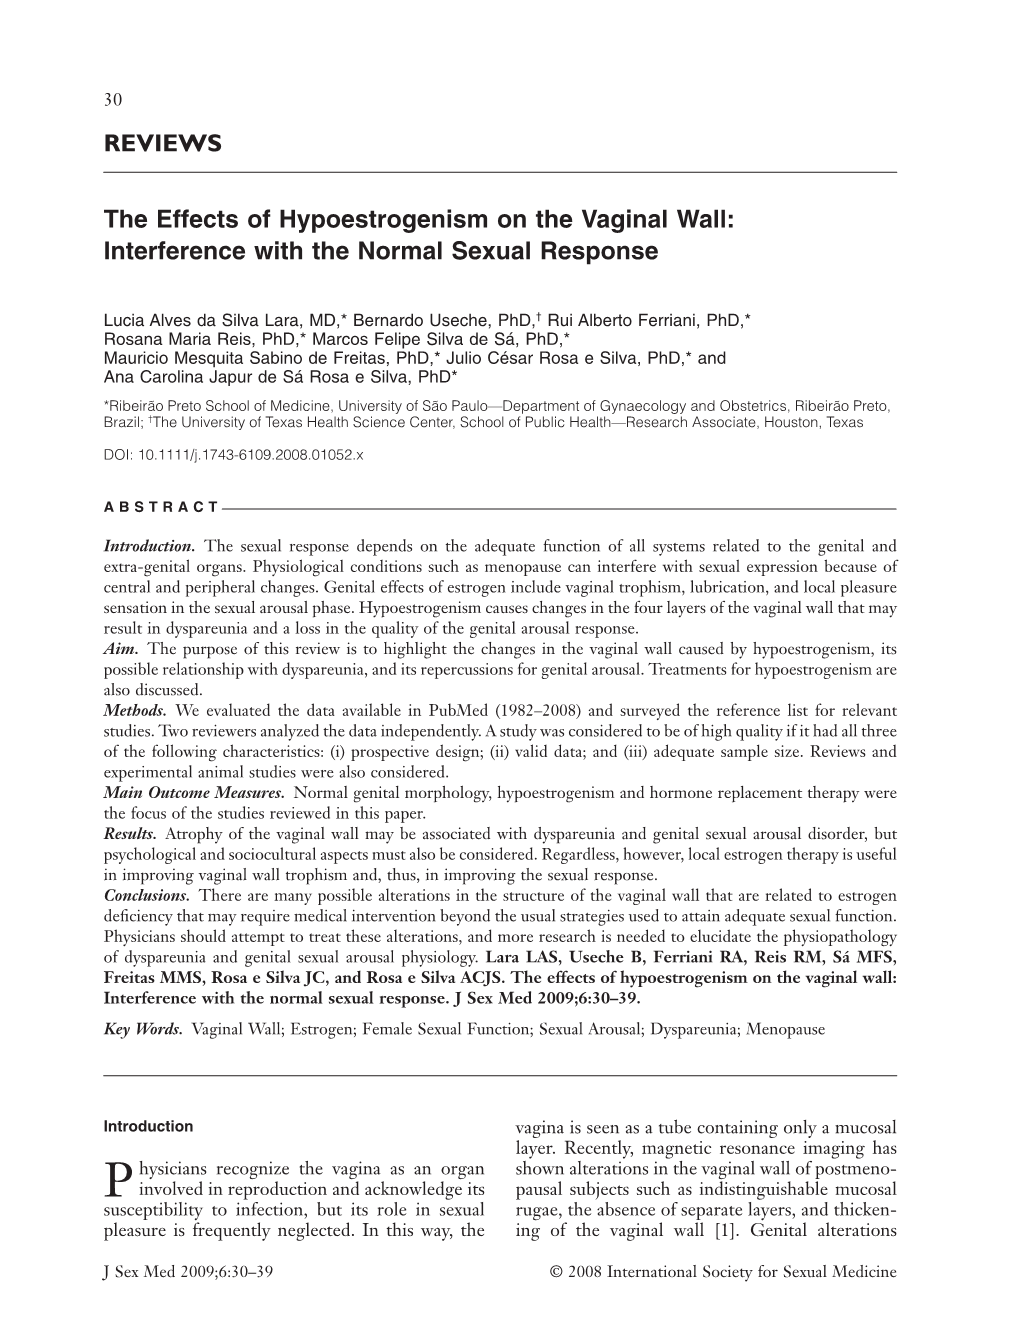 The Effects of Hypoestrogenism on the Vaginal Wall: Interference with the Normal Sexual Response